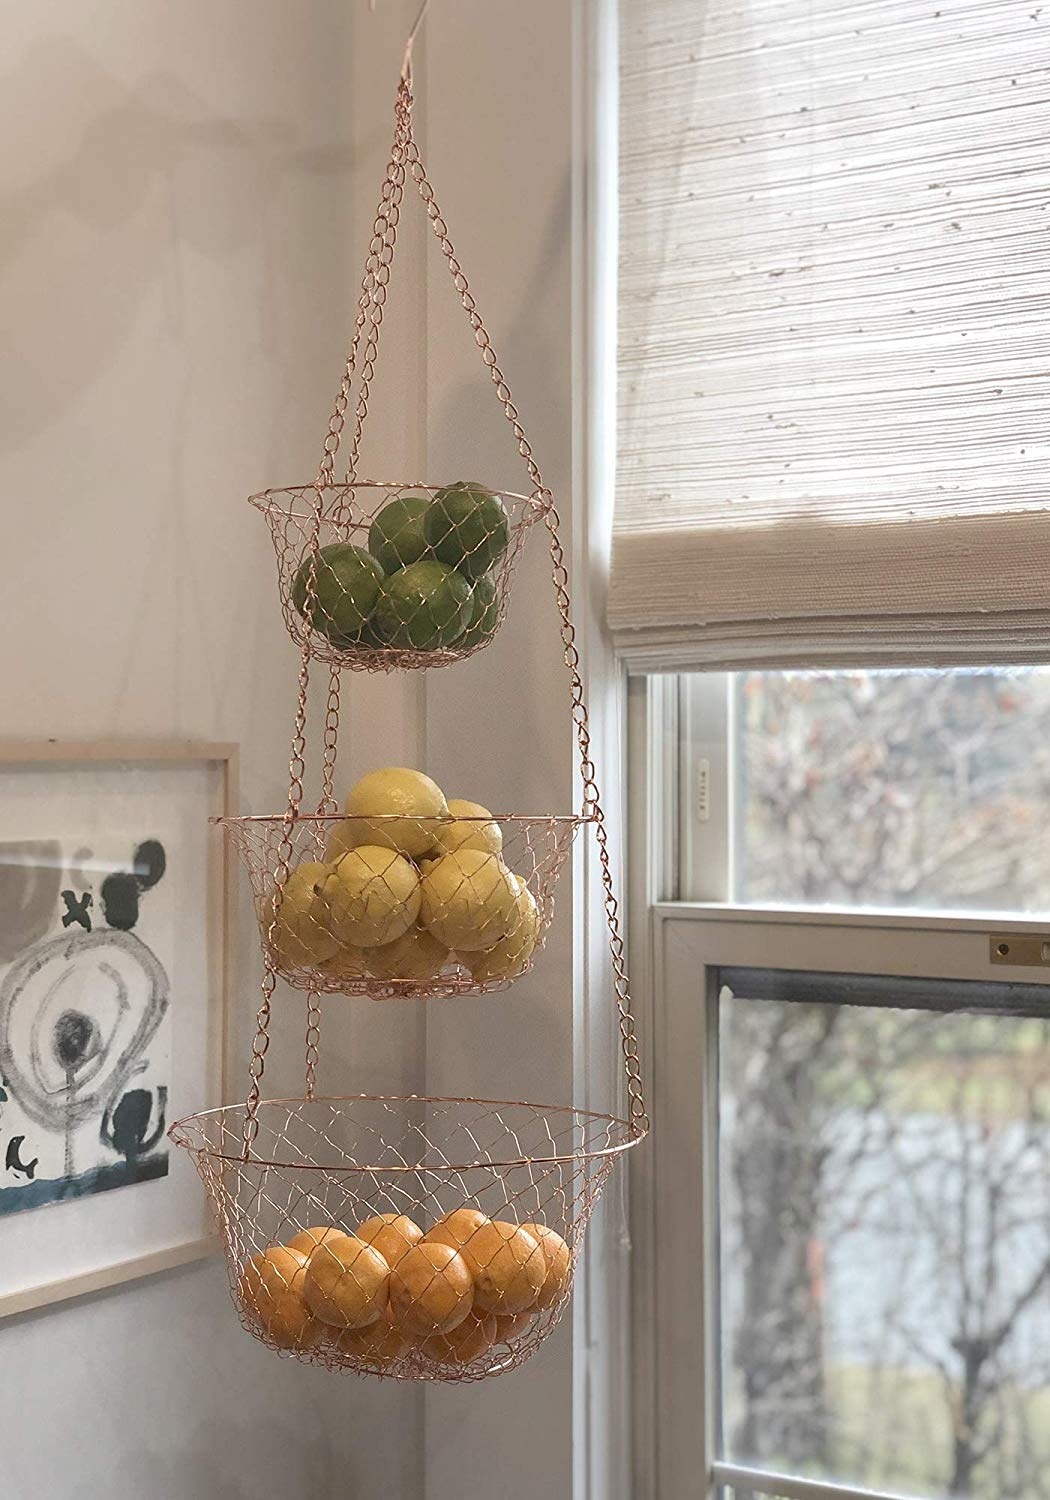 several fruits in the copper tiered baskets